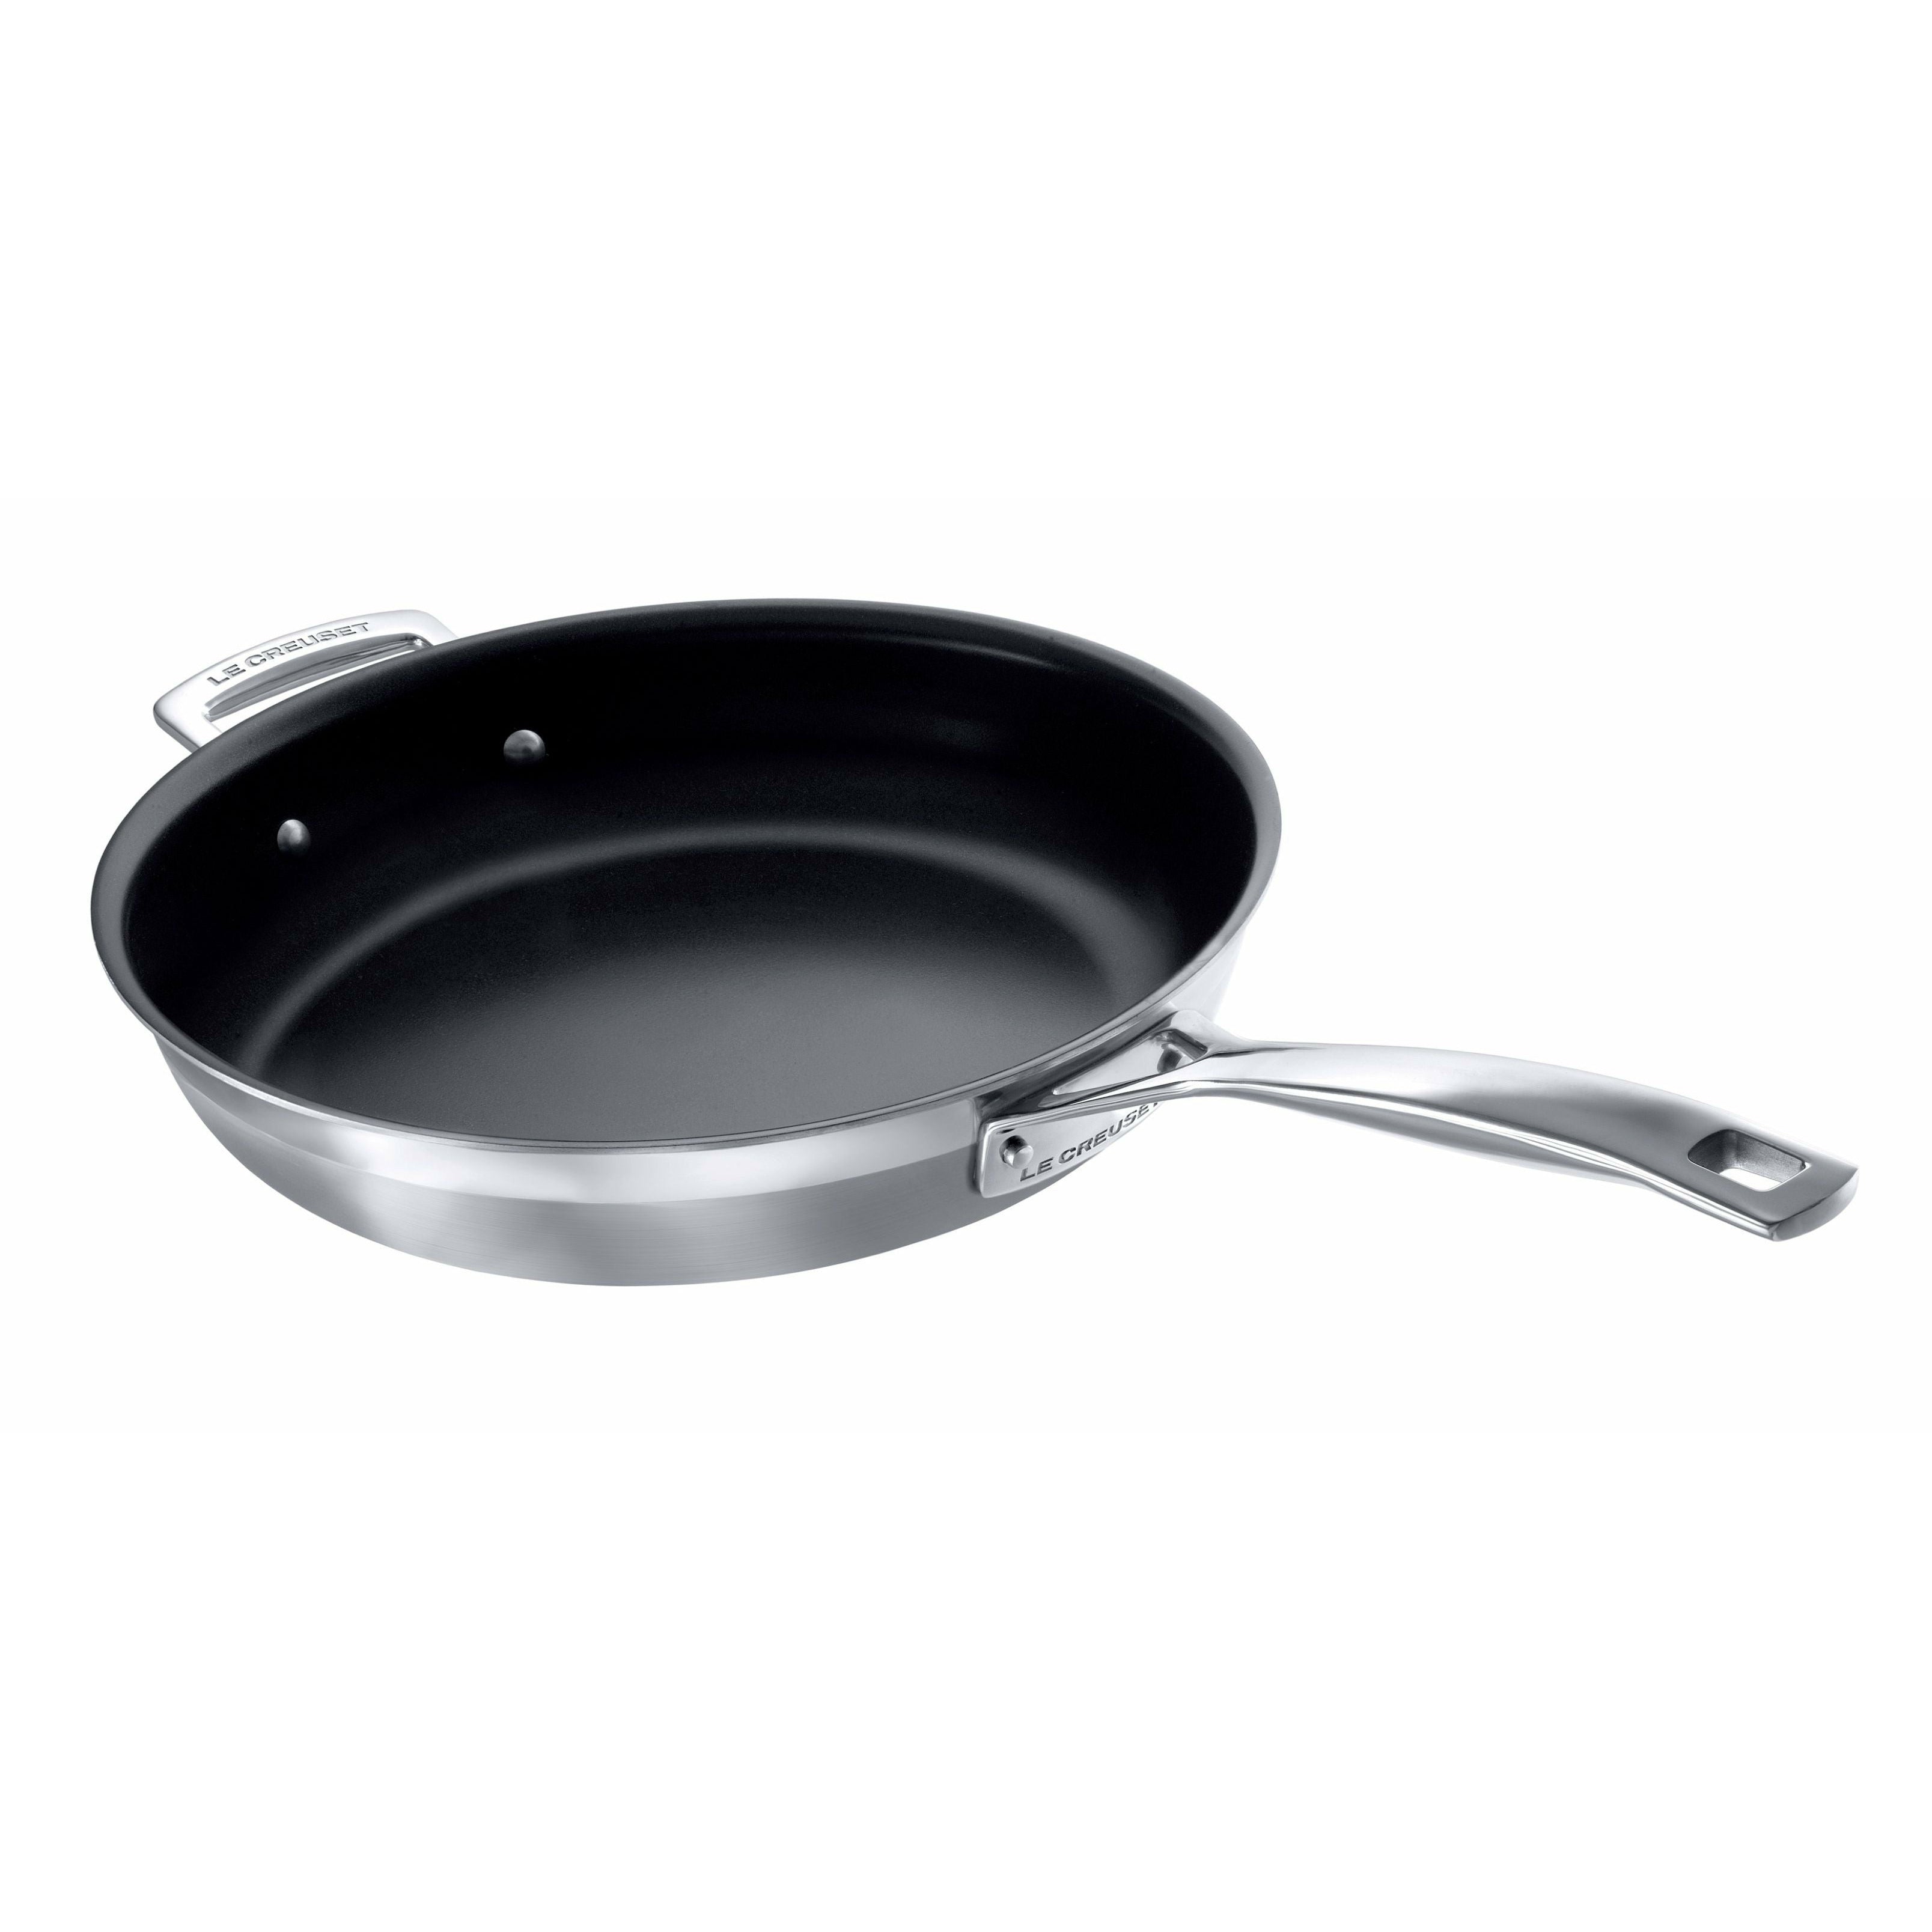 Le Creuset 3 Ply Stainless Steel Non Stick Frying Pan, 28 Cm